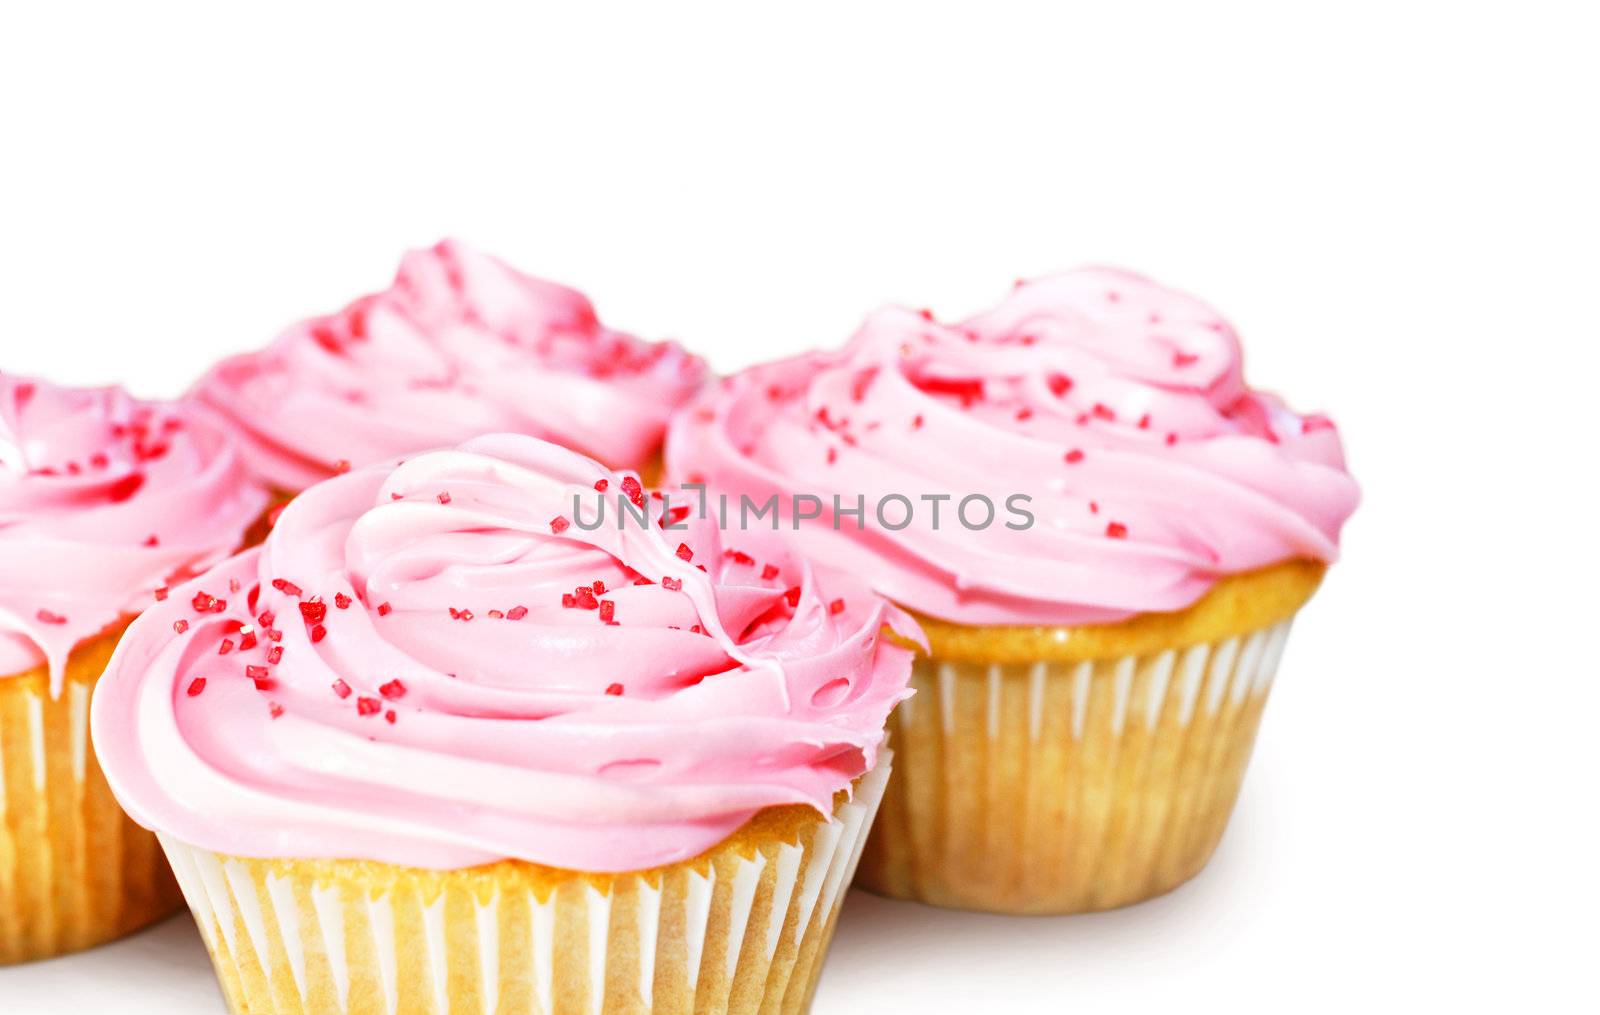 Sweet vanilla cupcakes with pink frosting over white